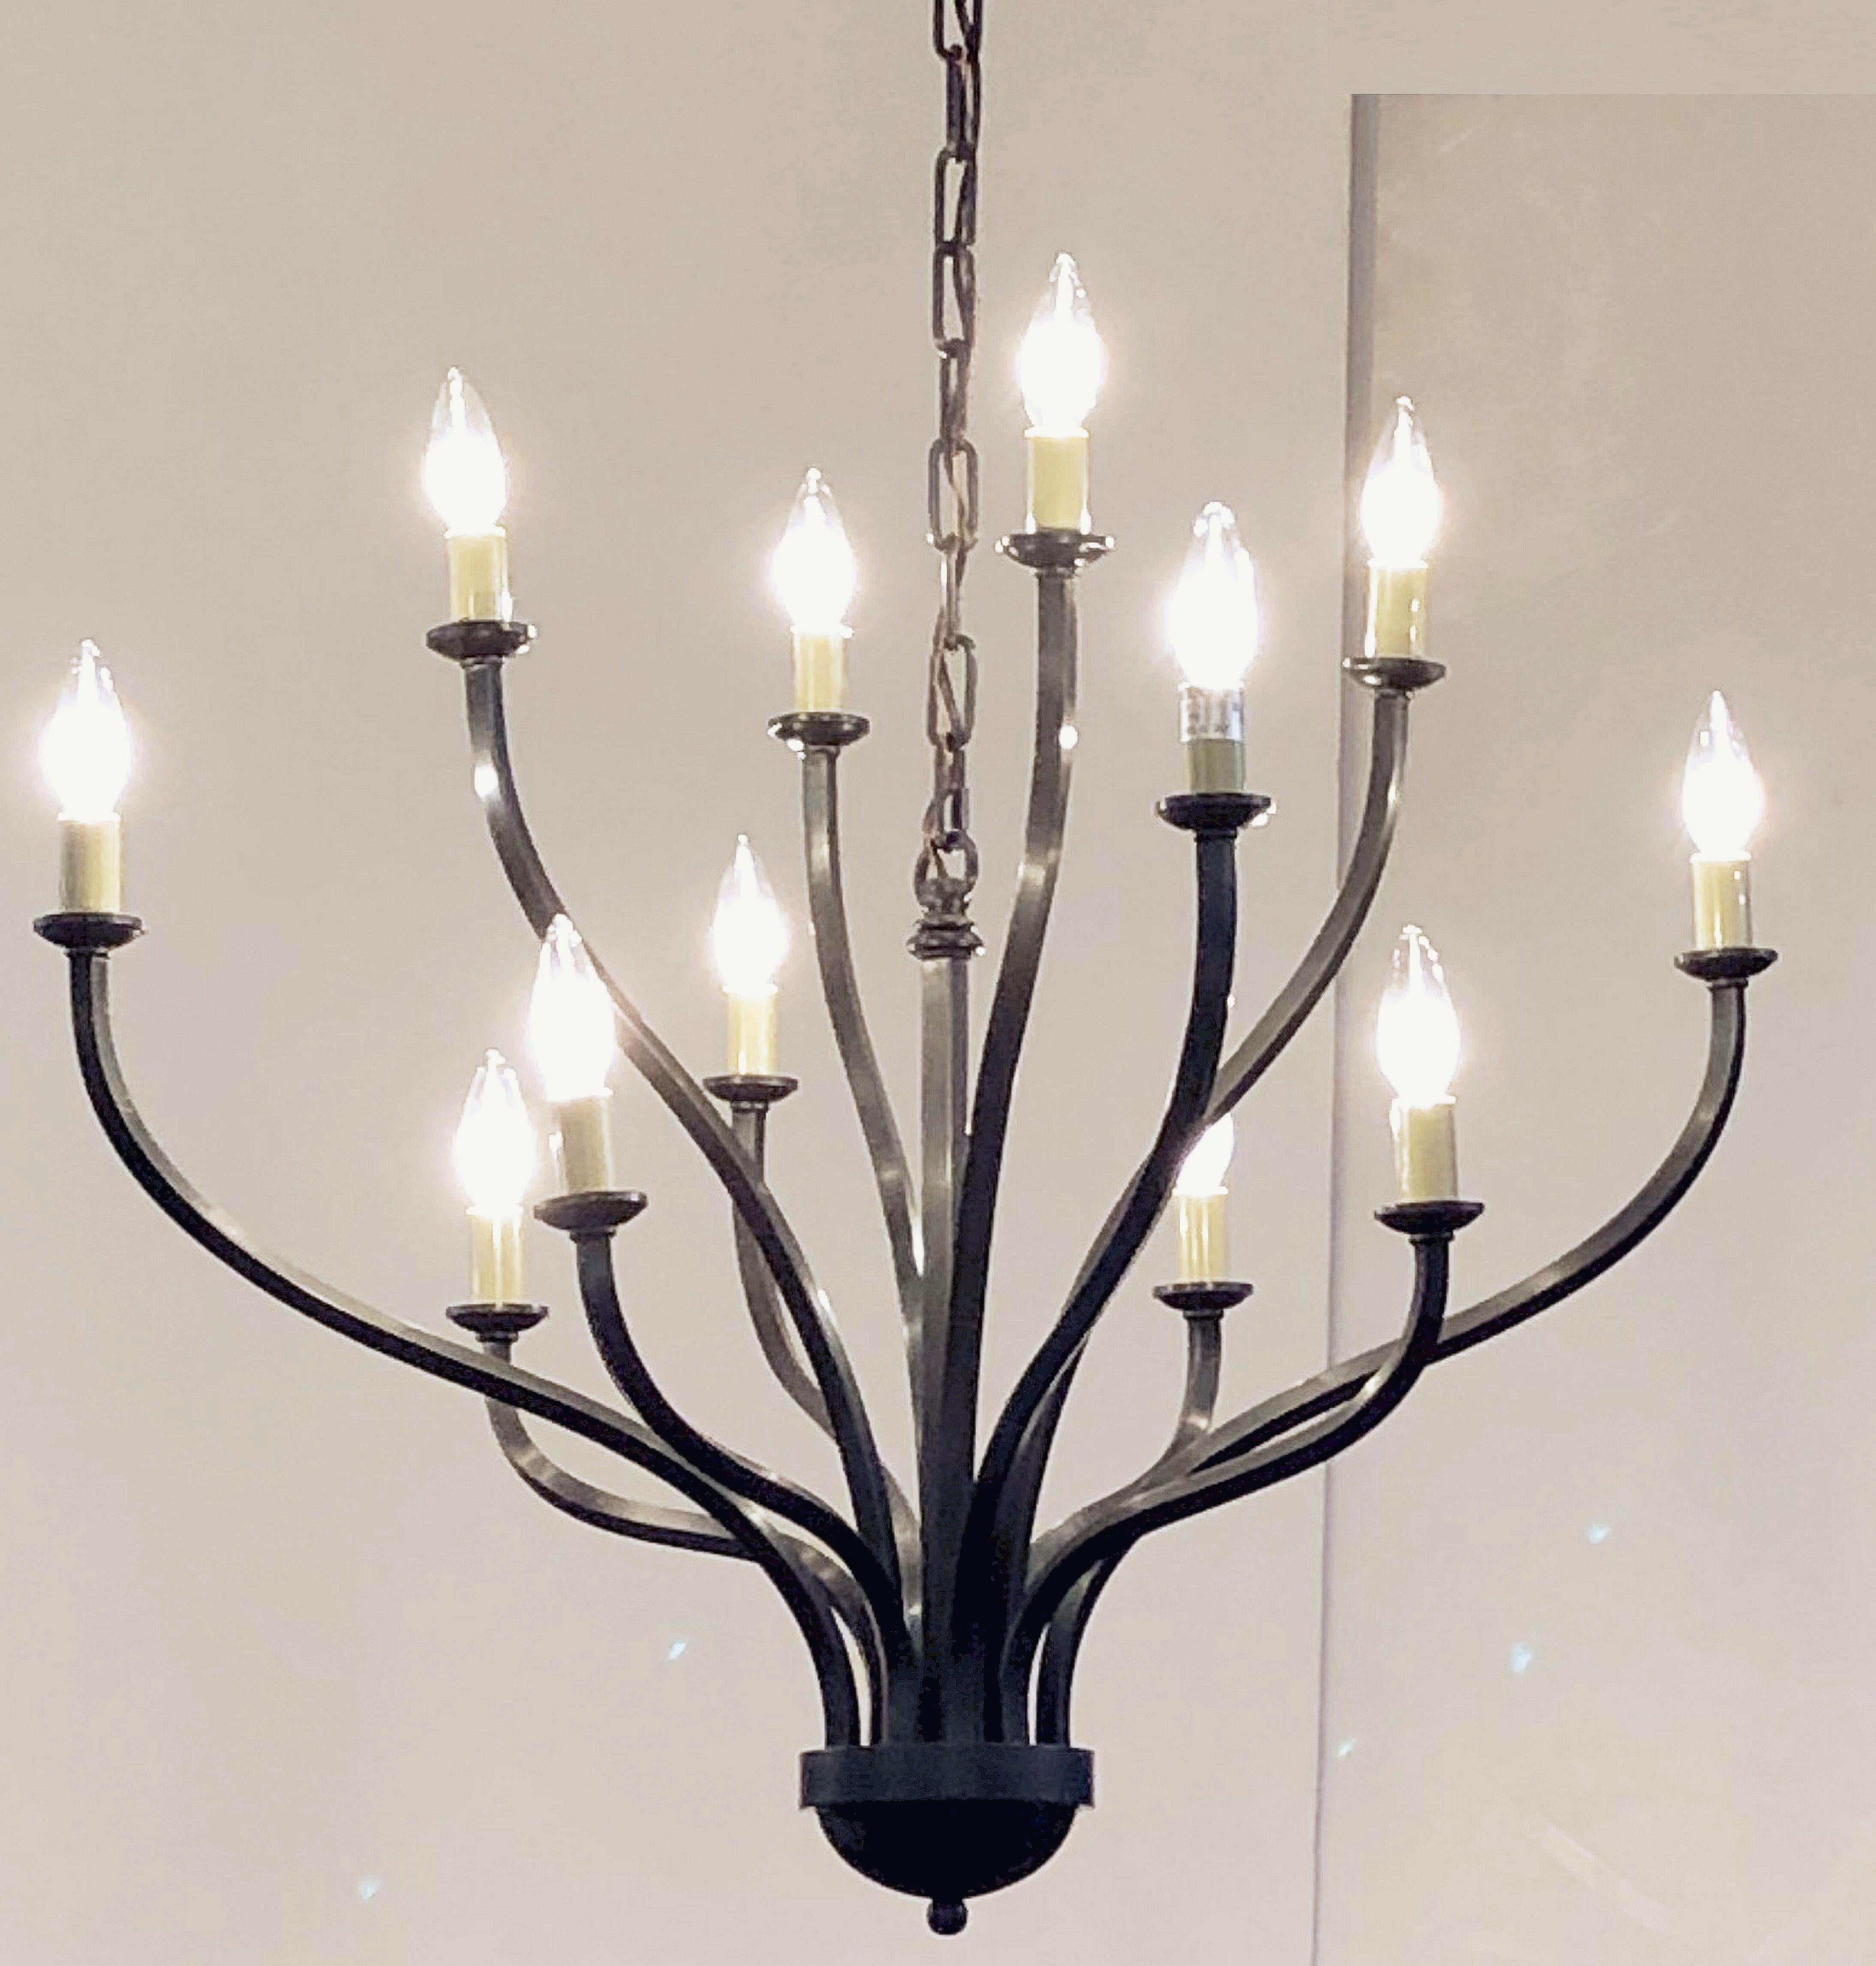 A large twelve-light hanging fixture of tubular metal, featuring a design of twelve ascendant arms around a column post.

U.S. wired, Ready for display.

Dimensions are approximately H 29 in x Diameter 32 in.